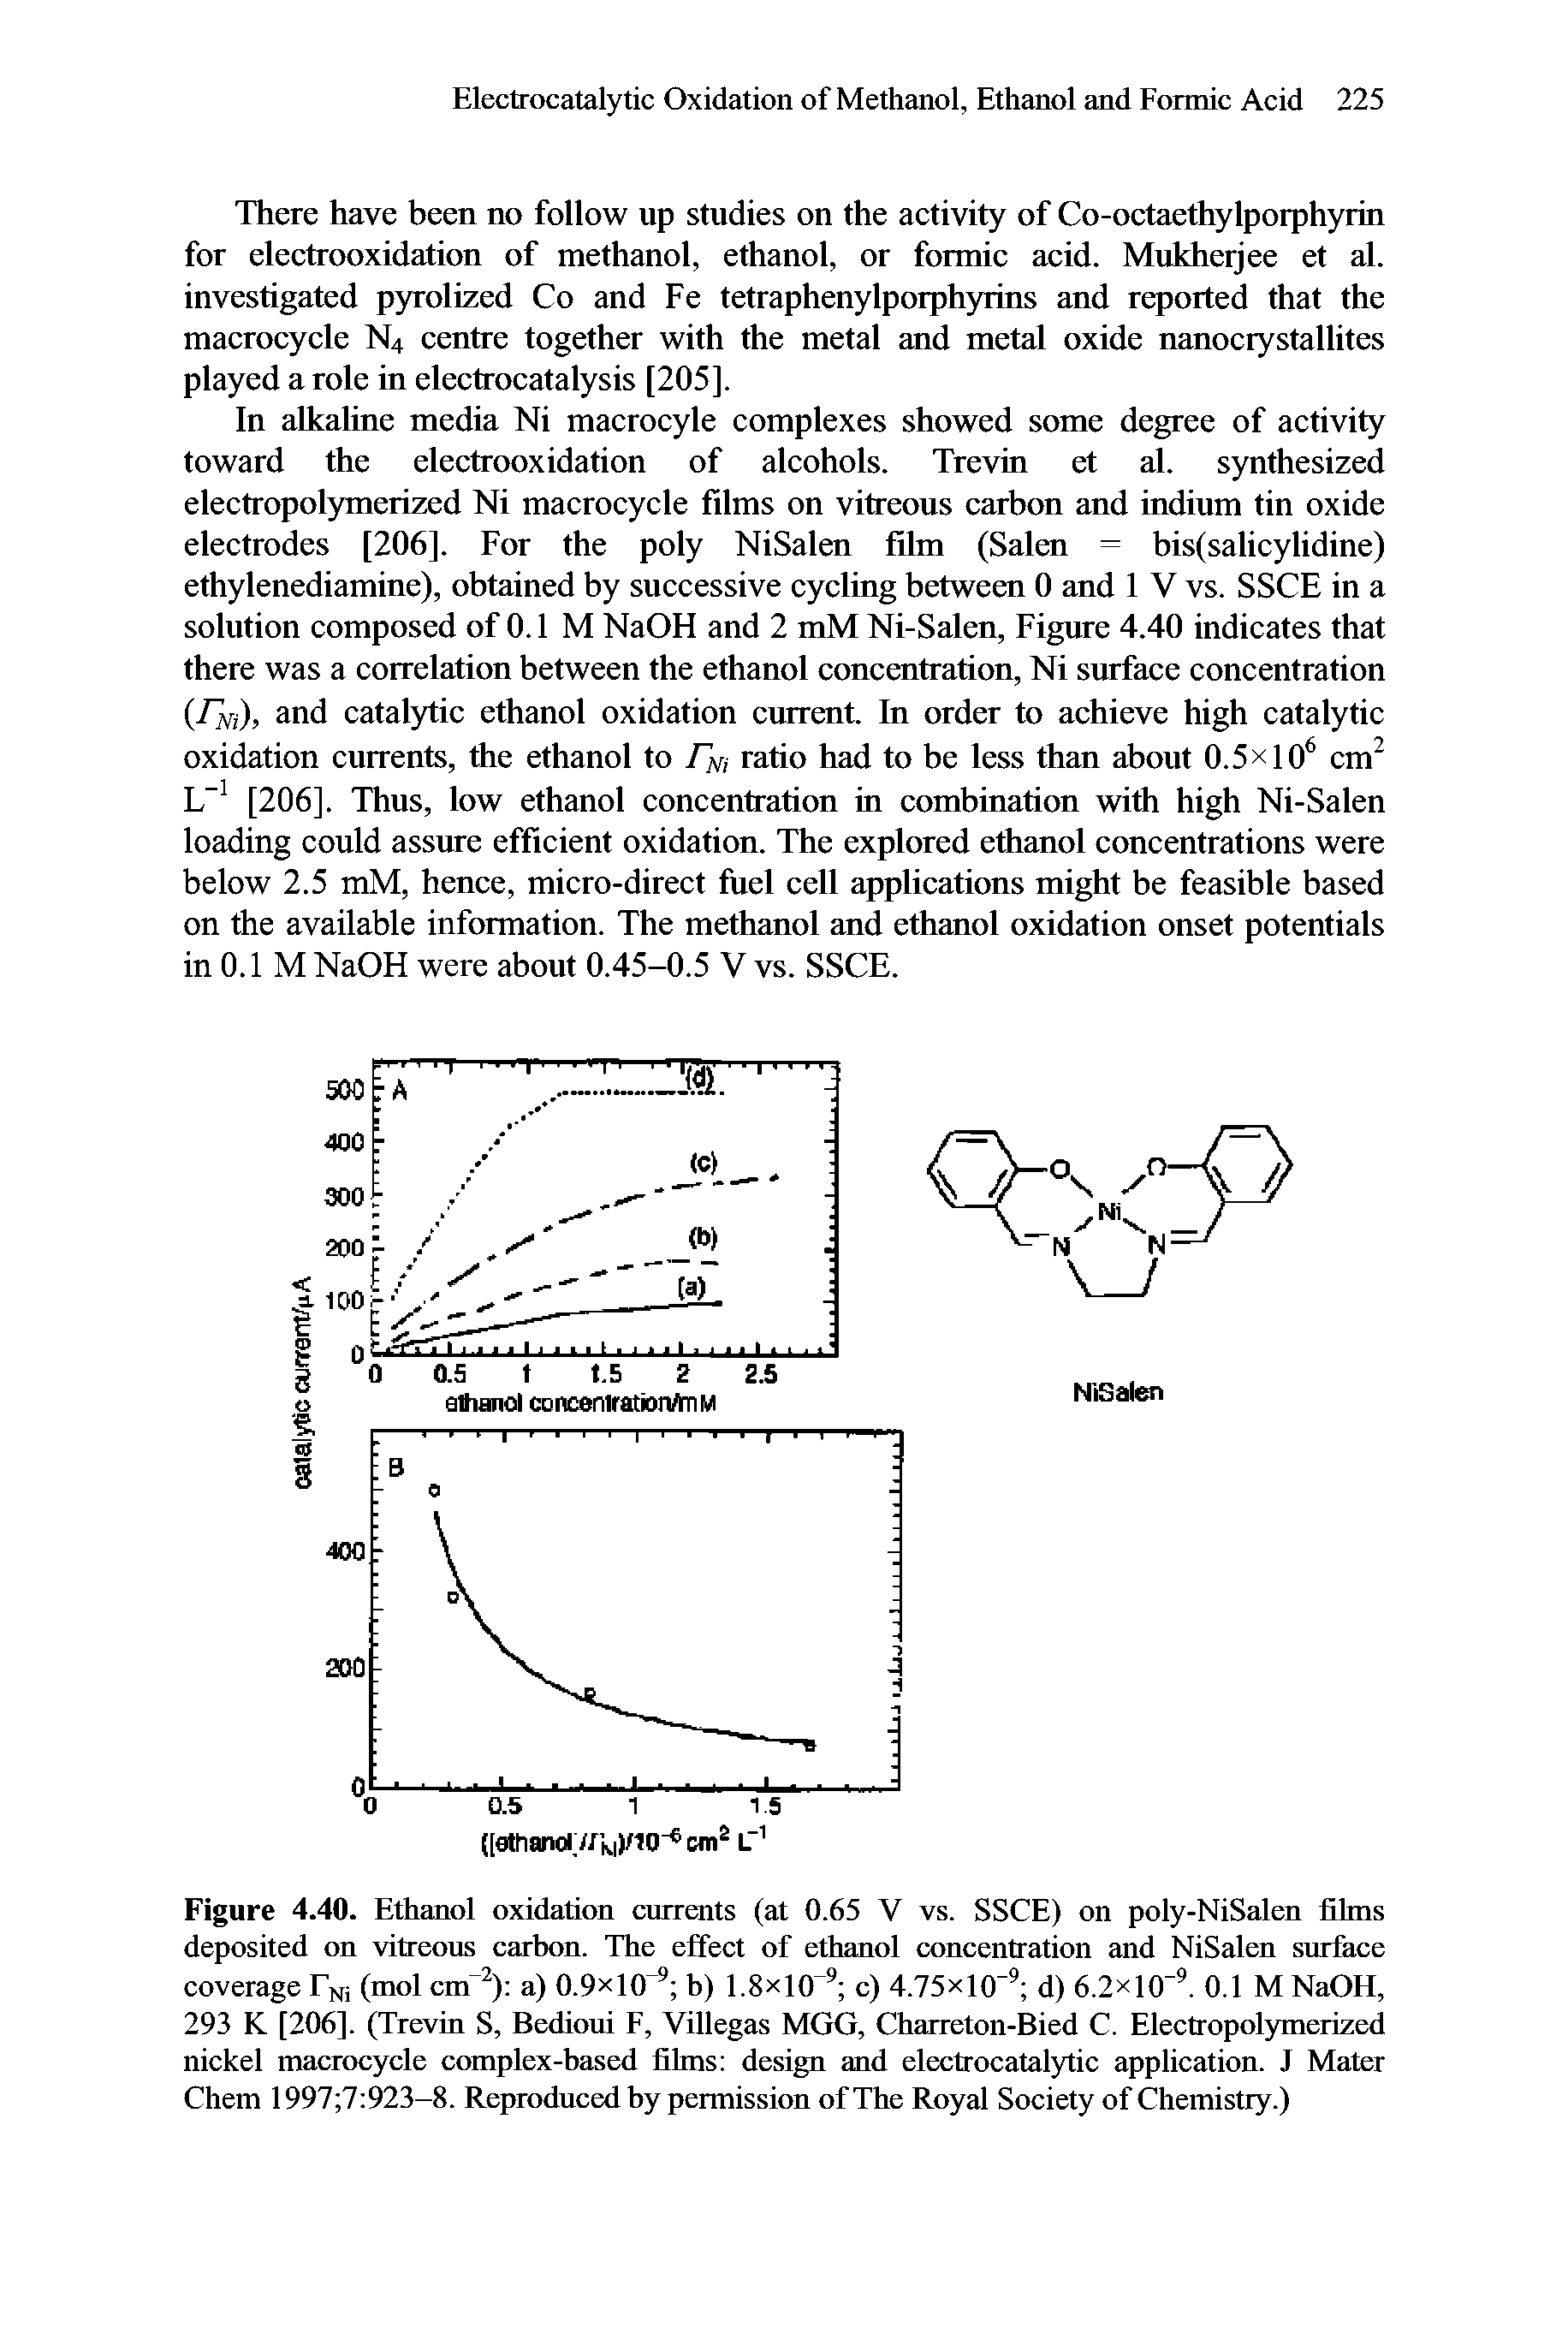 Figure 4.40. Ethanol oxidation currents (at 0.65 V vs. SSCE) on poly-NiSalen films deposited on vitreous carbon. The effect of ethanol concentration and NiSalen surface coverage Fni (mol cm ) a) 0.9x10 h) 1.8x10 c) 4.75x10 d) 6.2x10 . 0.1 M NaOH, 293 K [206]. (Trevin S, Bedioui F, Villegas MGG, Charreton-Bied C. Electropolymerized nickel macrocycle complex-based films design and electrocataljhic application. J Mater Chem 1997 7 923-8. Reproduced by permission of The Royal Society of Chemistry.)...